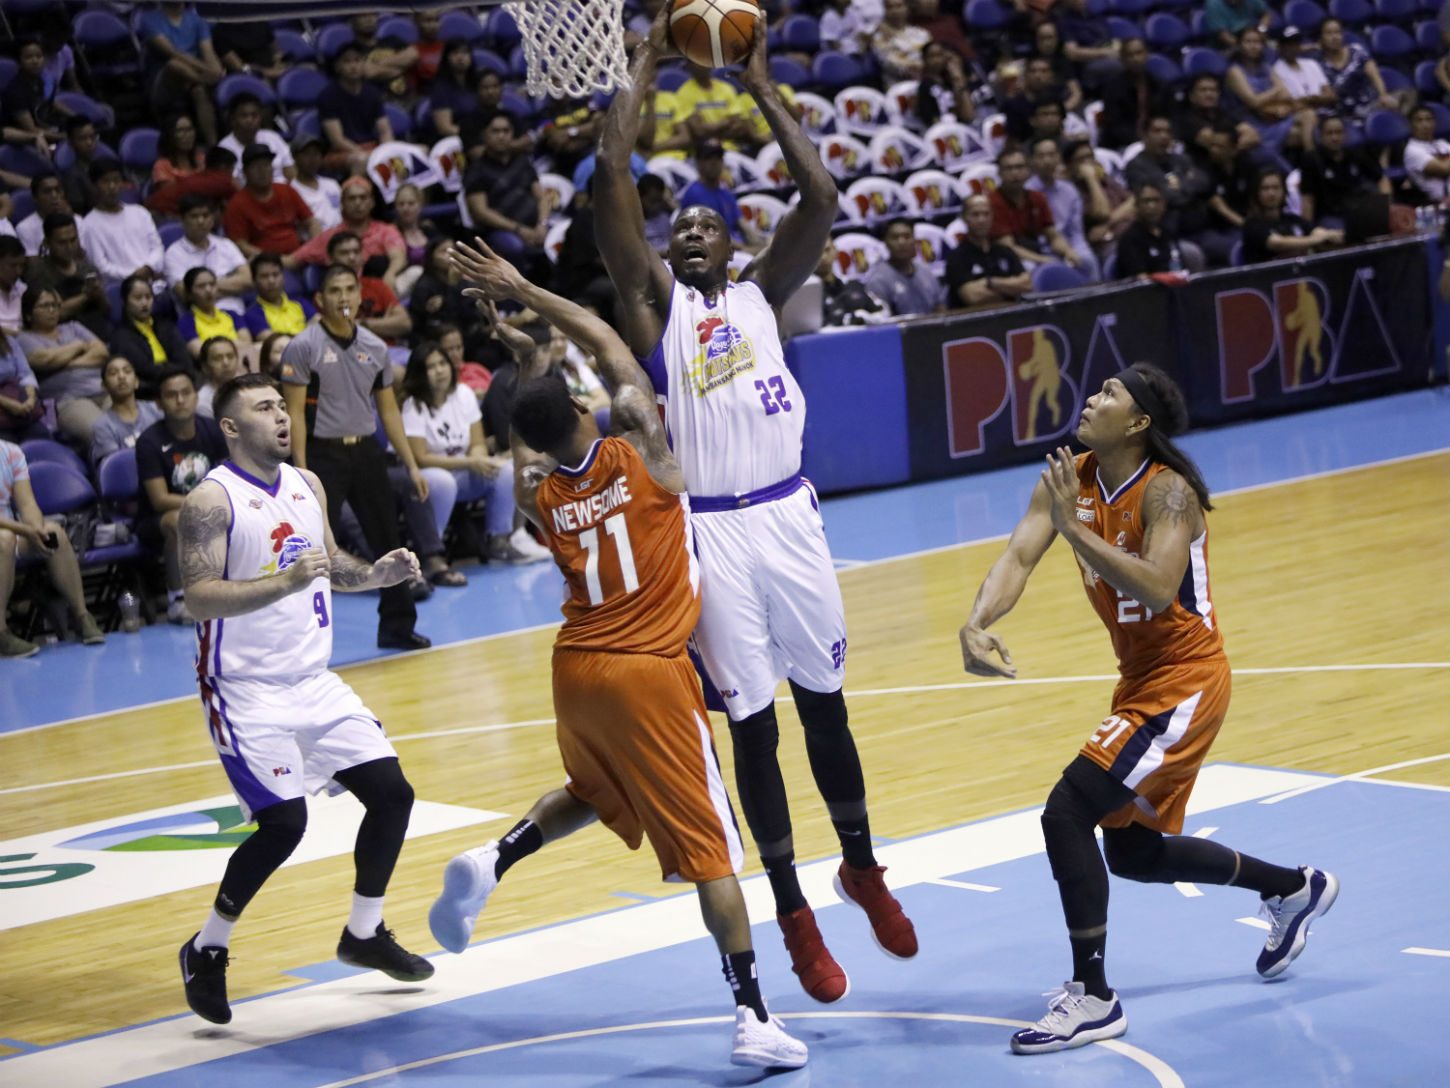 Macklin leaves lasting mark with clutch FTs as Magnolia edges Meralco